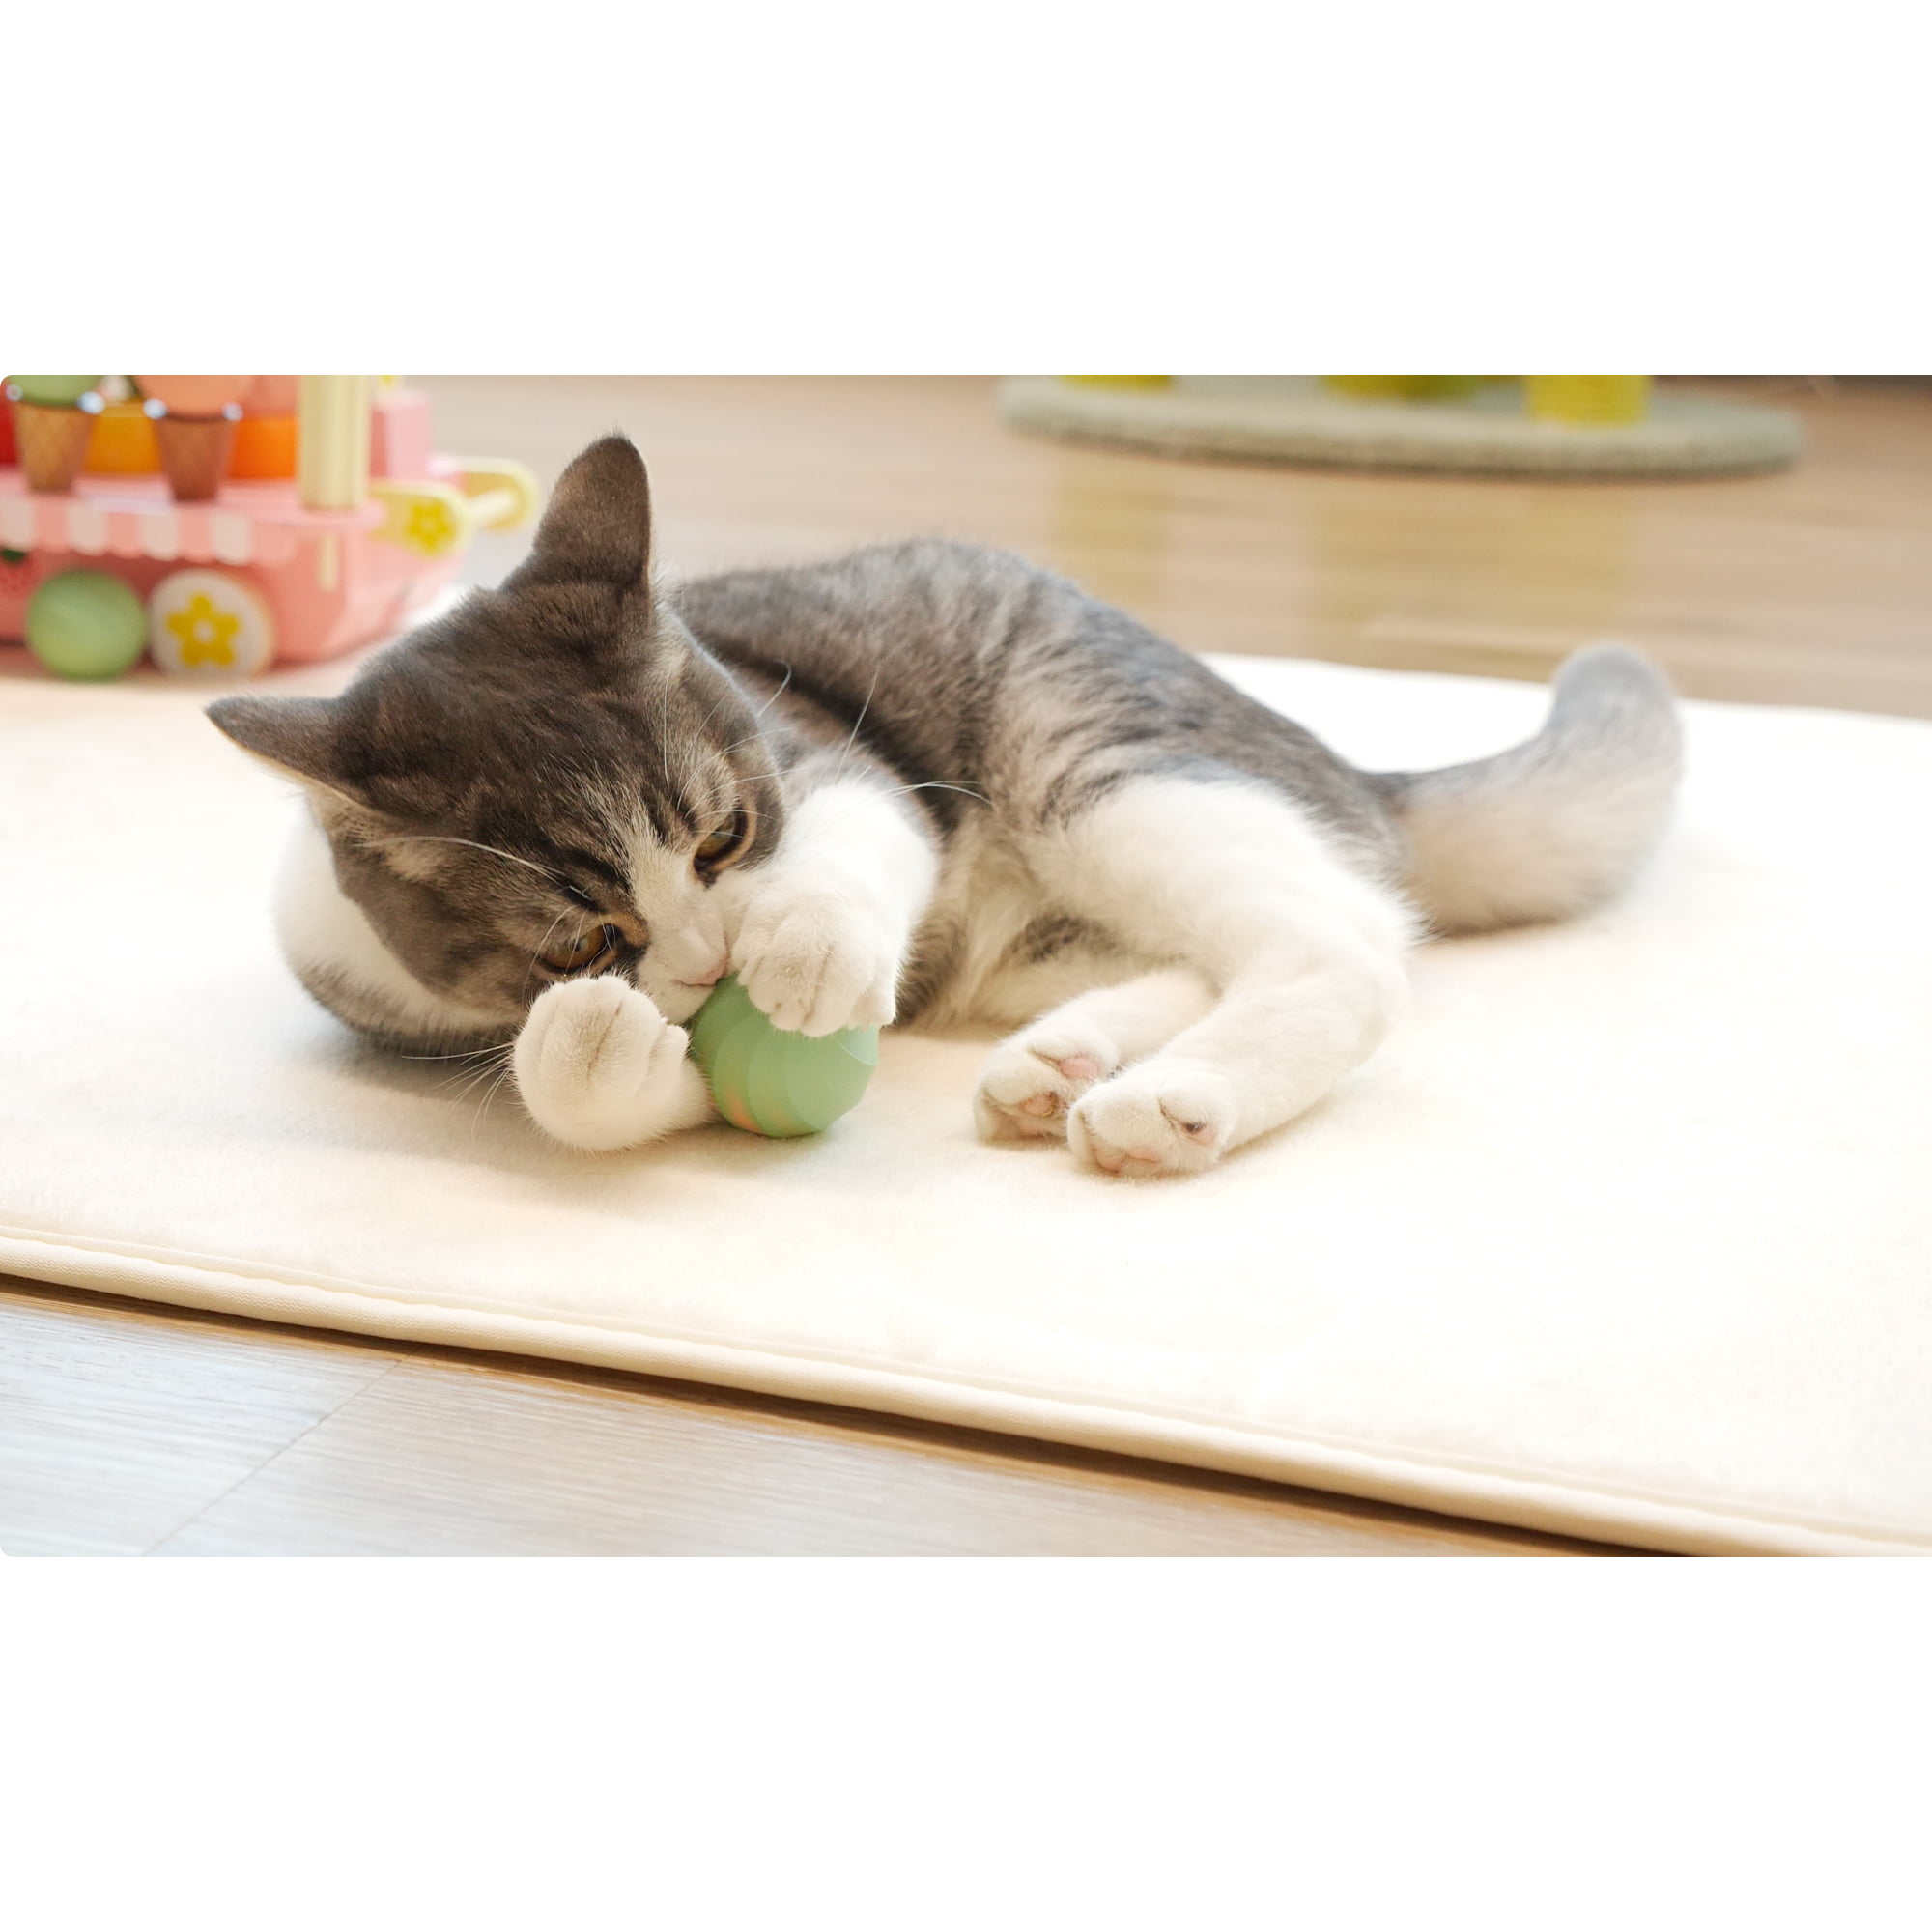 Cheerble Ice Cream Ball, Smart Interactive Cat Toy Ball, Blue